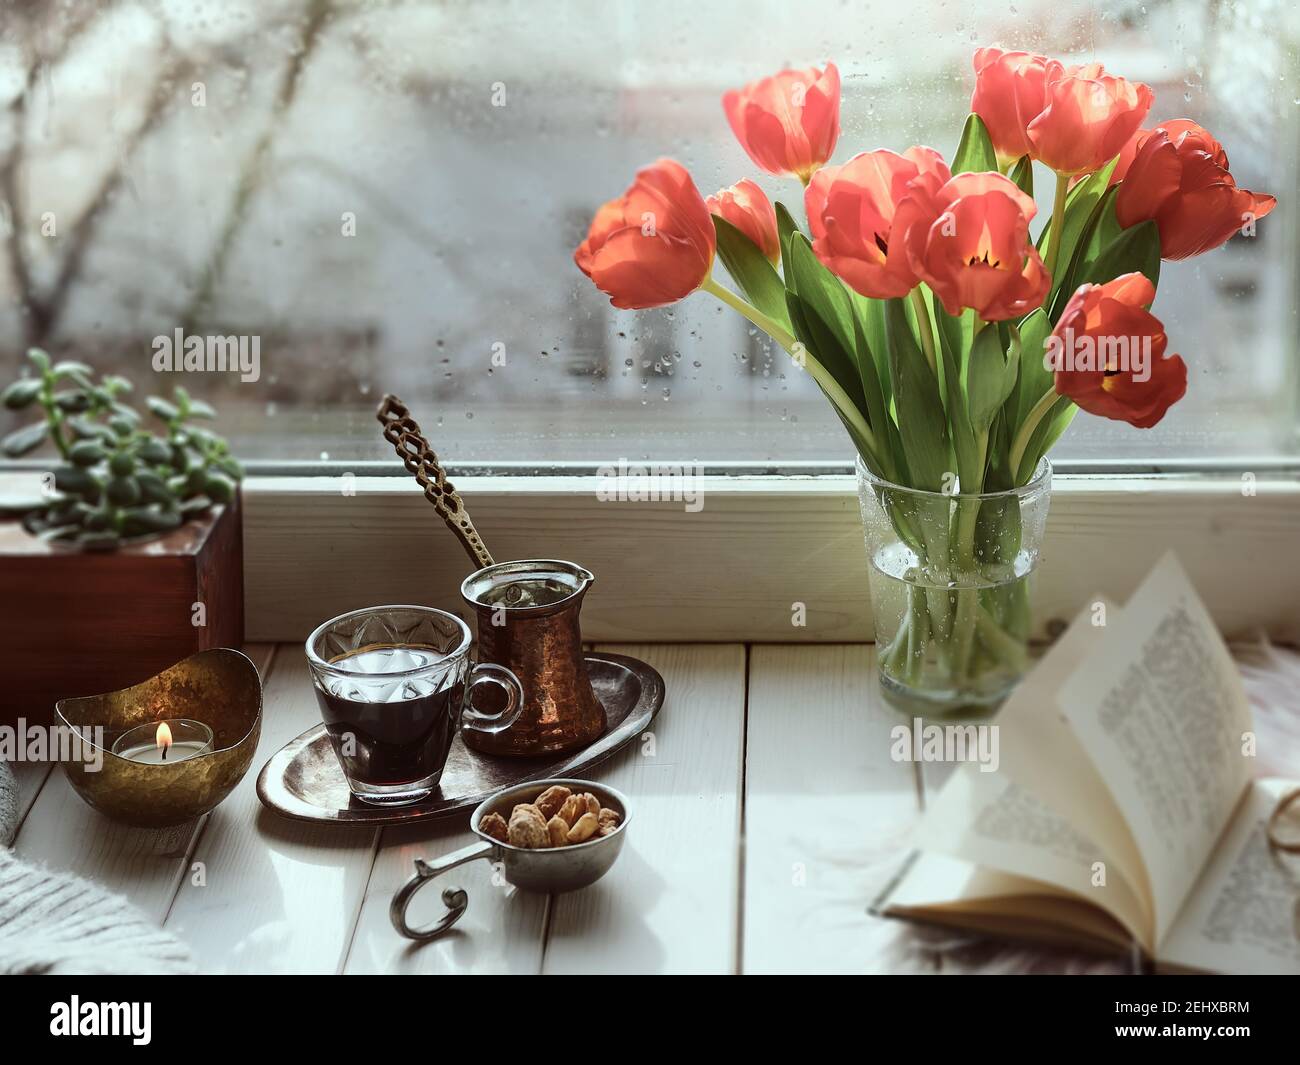 Oriental coffee cooked in traditional Turkish copper coffee pot with flowers on window sill. Wooden windowsill with bunch of tulips book.Cozy scene, h Stock Photo